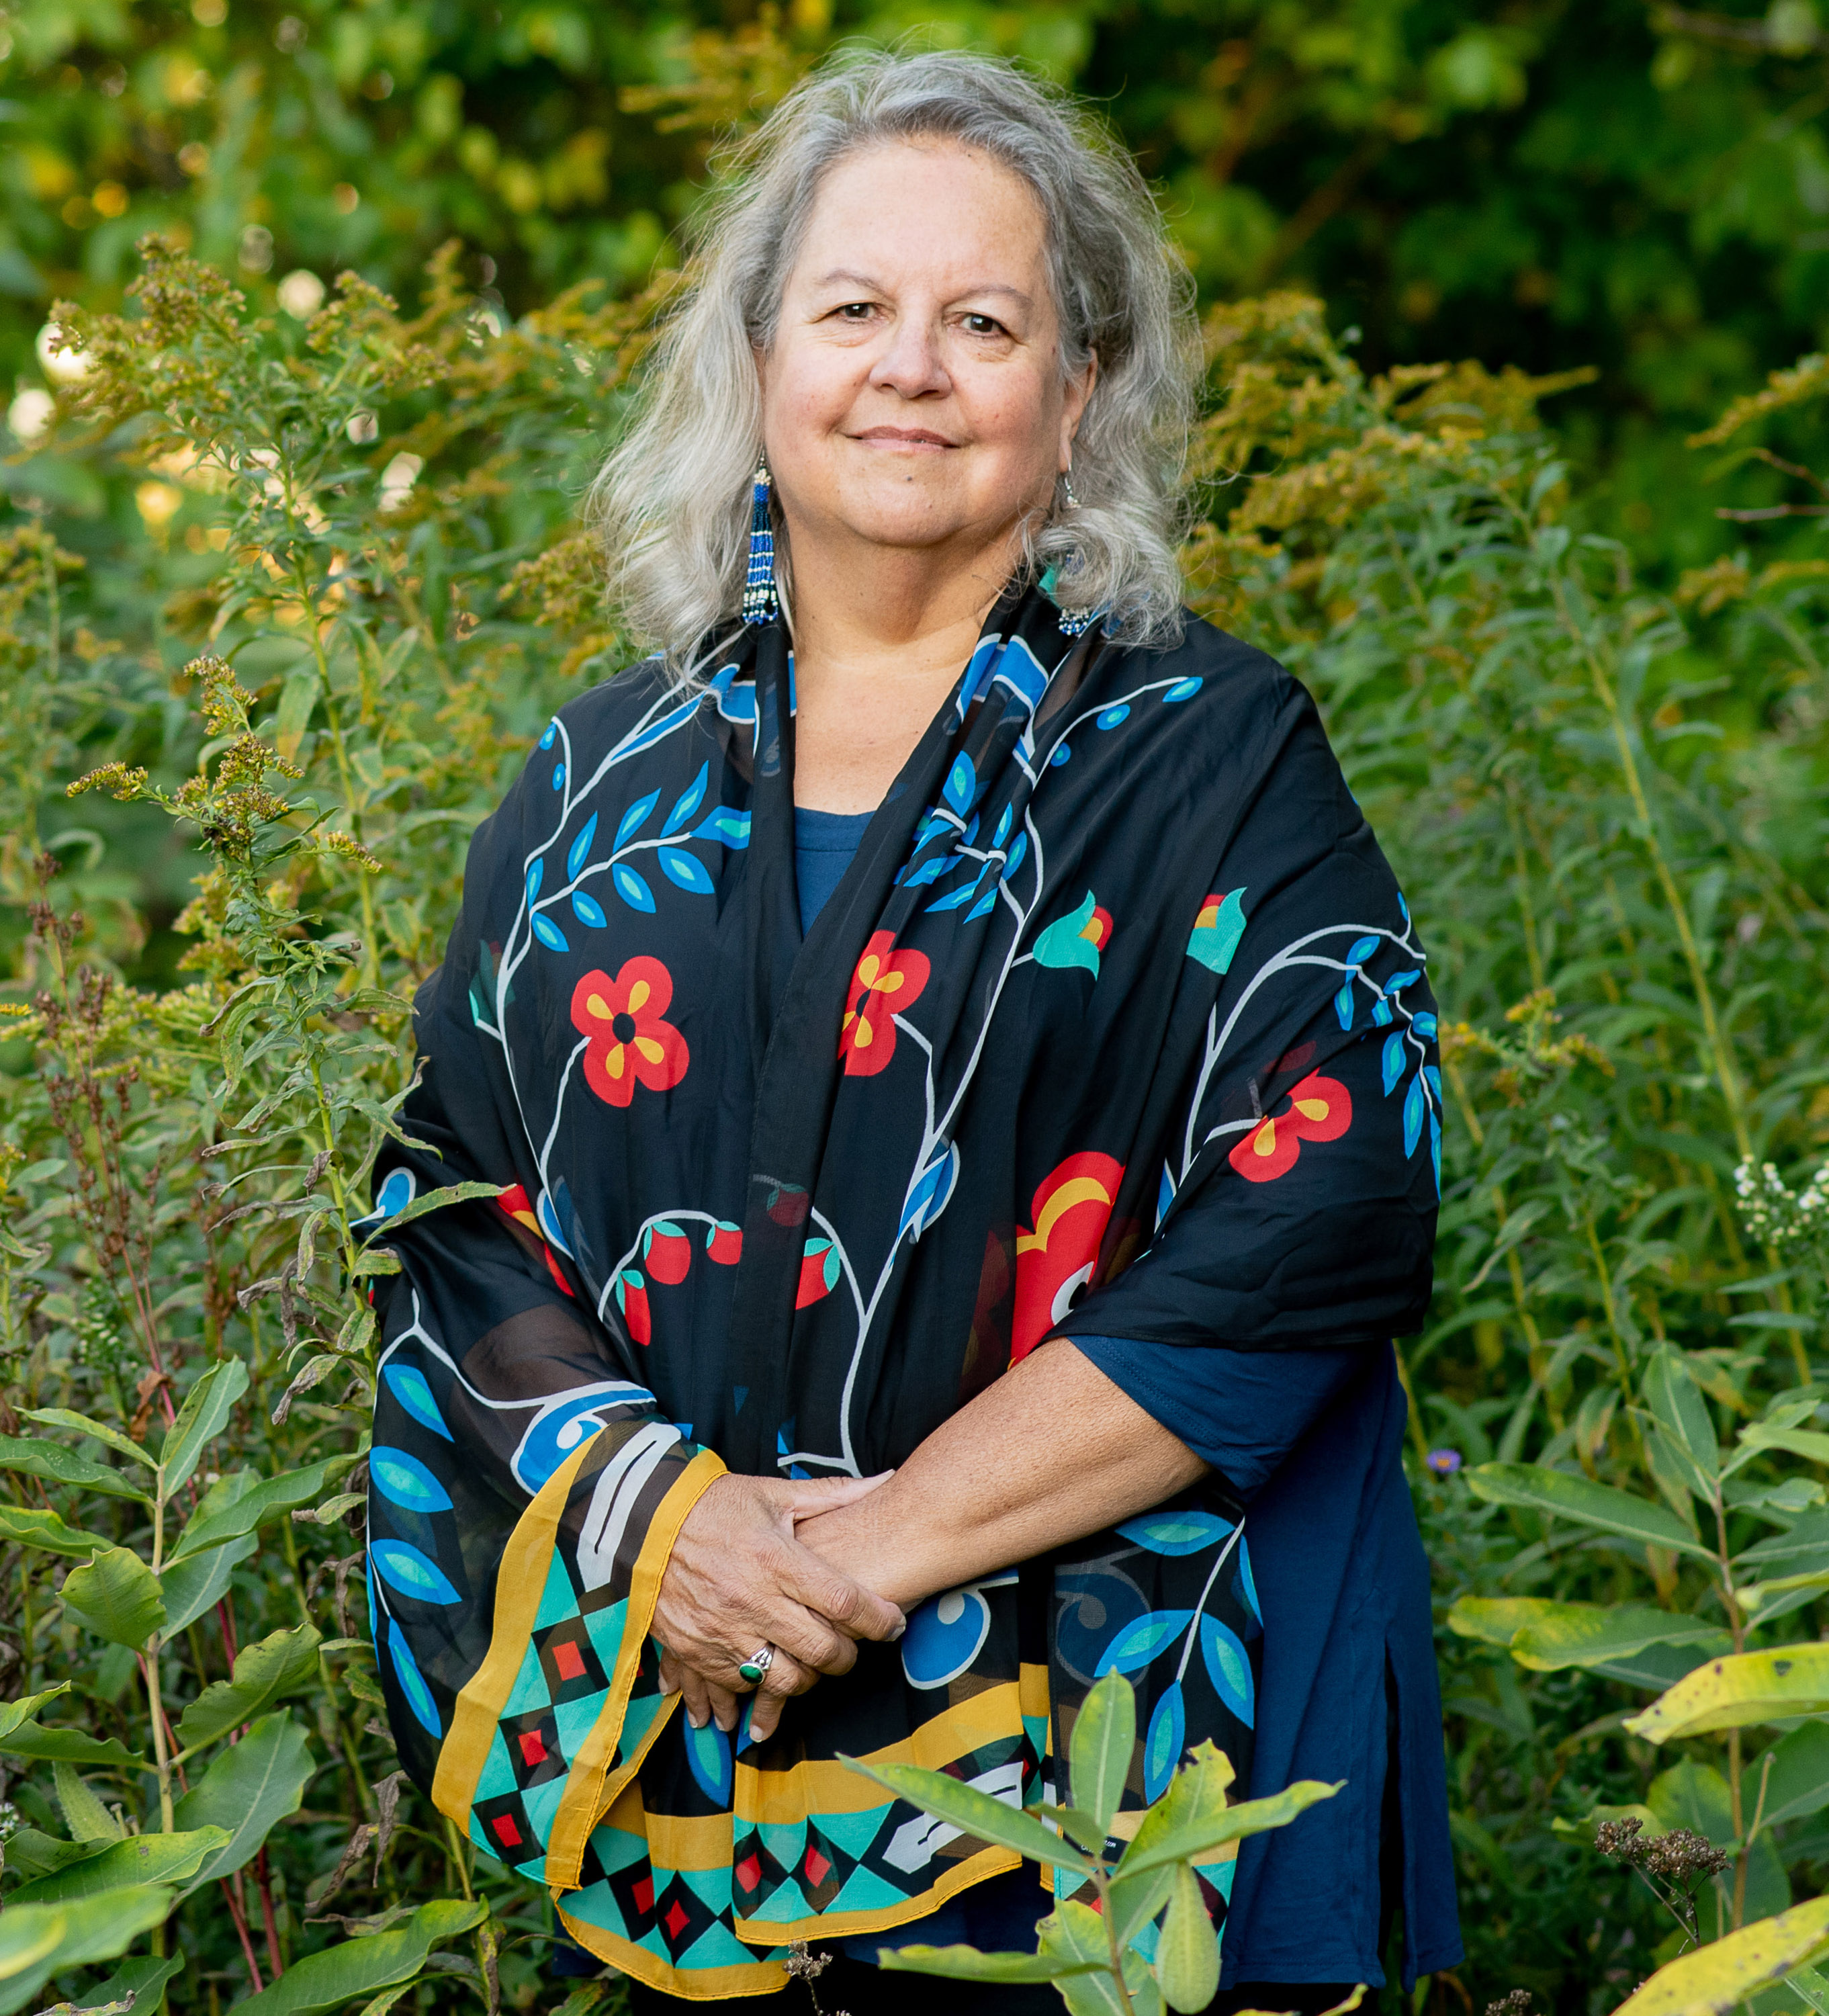 Author Robin Wall Kimmerer